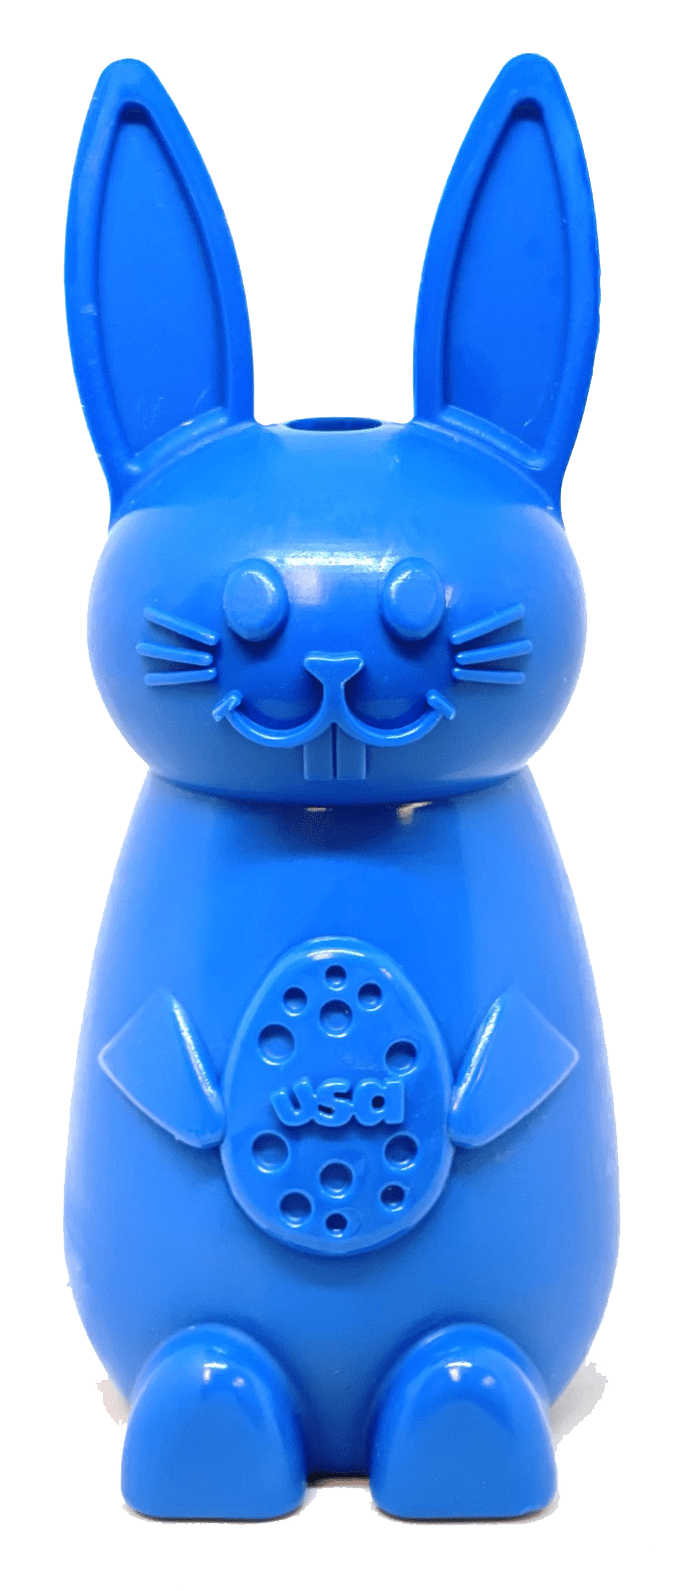 Durable Nylon Bunny Chew Toy and Enrichment Toy for Aggressive Chewers - Nylon Bunny - blue